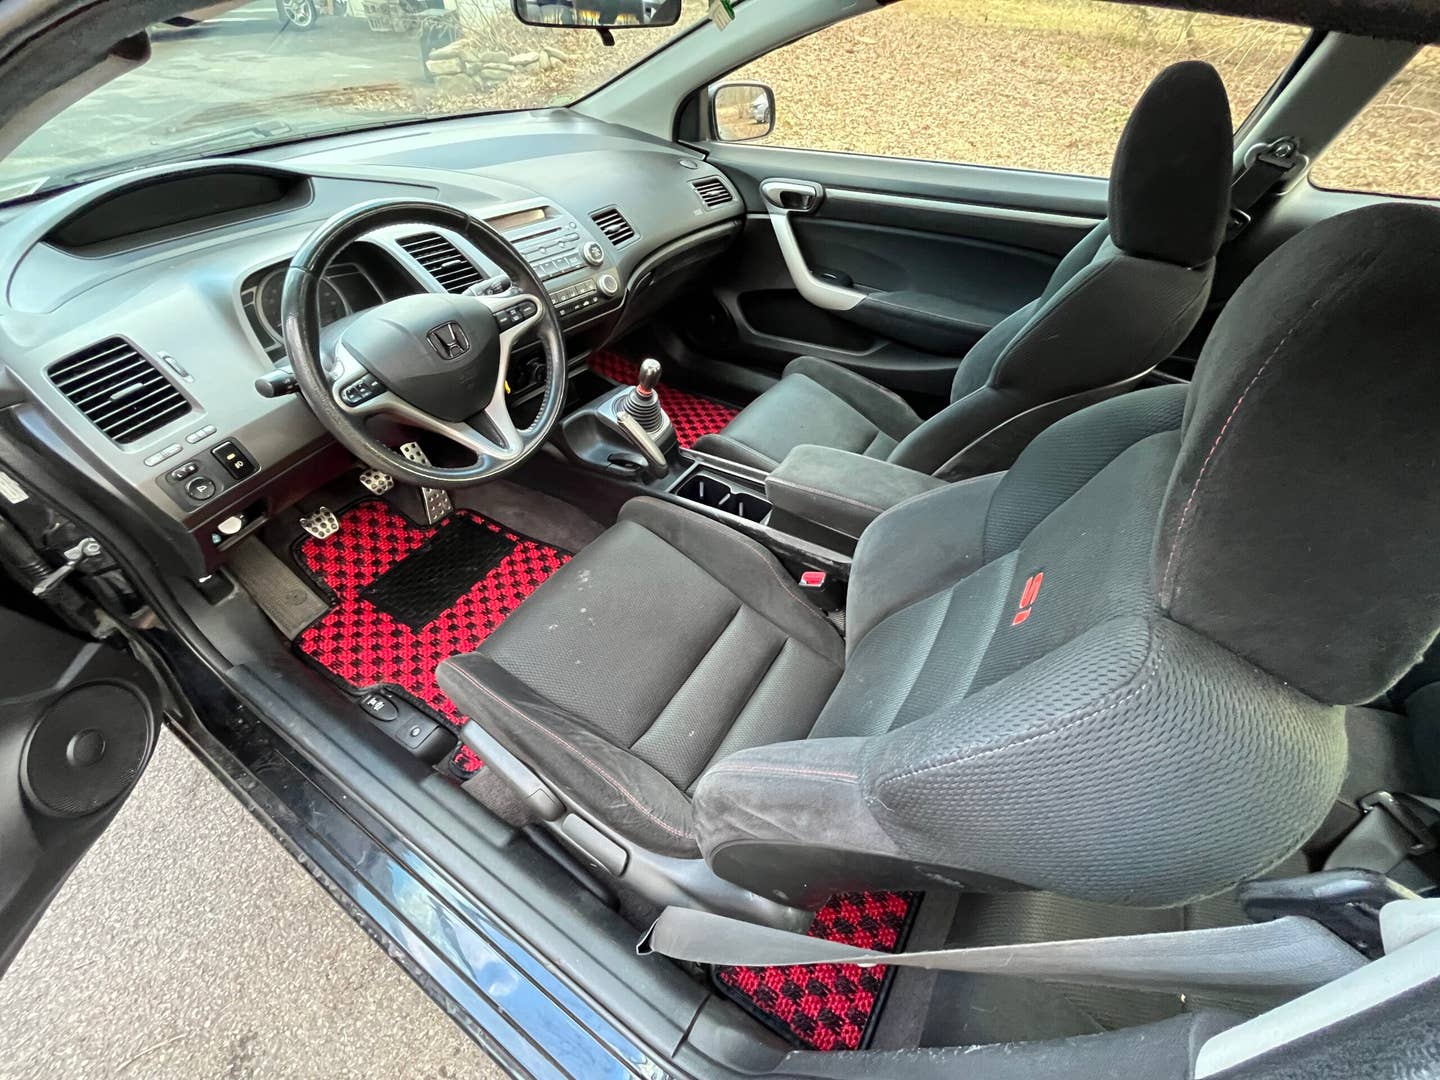 The stock eighth-gen Si seats look decent, but I'm not very impressed with their comfort. Those floormats are from CocoMats, by the way, and I'm crazy about them—did <a href="https://www.thedrive.com/guides-and-gear/cocomats-floor-mats-review-cool-classy-and-worth-the-money" target="_blank" rel="noreferrer noopener">a whole review on those too</a> if you're interested. <em>Andrew P. Collins</em>